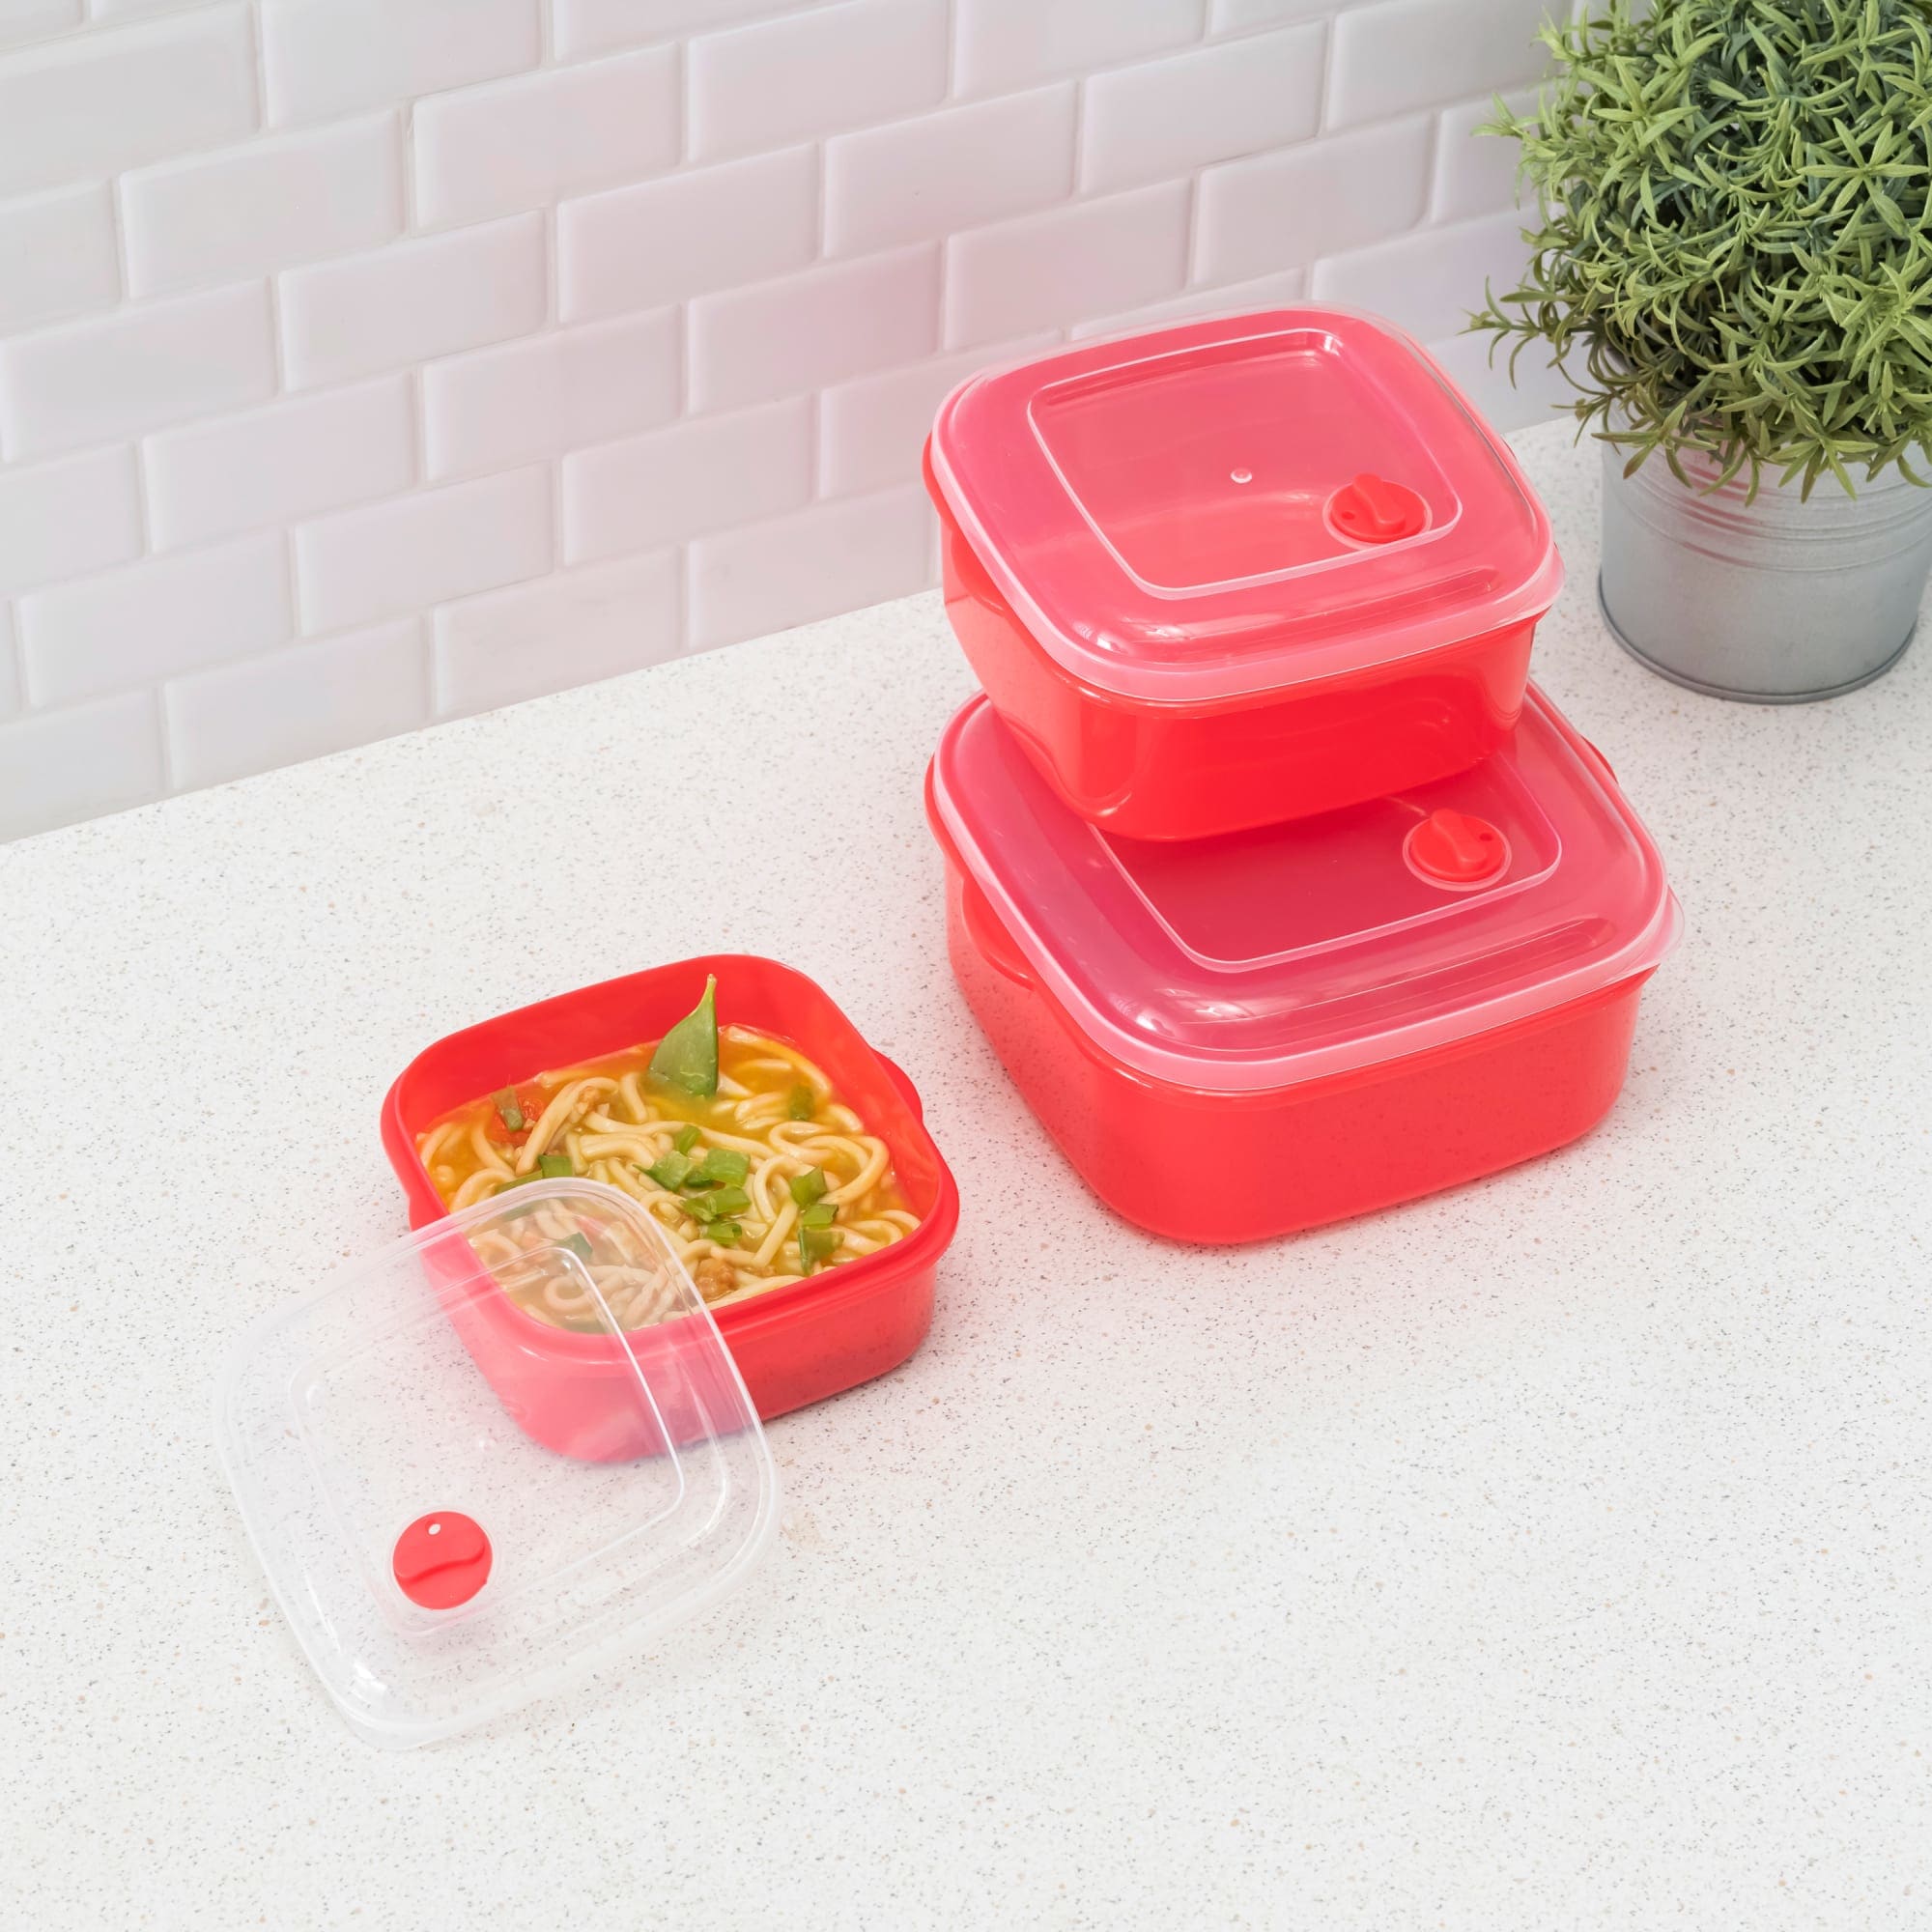 Home Basics Microwave Safe Plastic Square Food Storage Containers, (Pack of 3), Red $4 EACH, CASE PACK OF 12